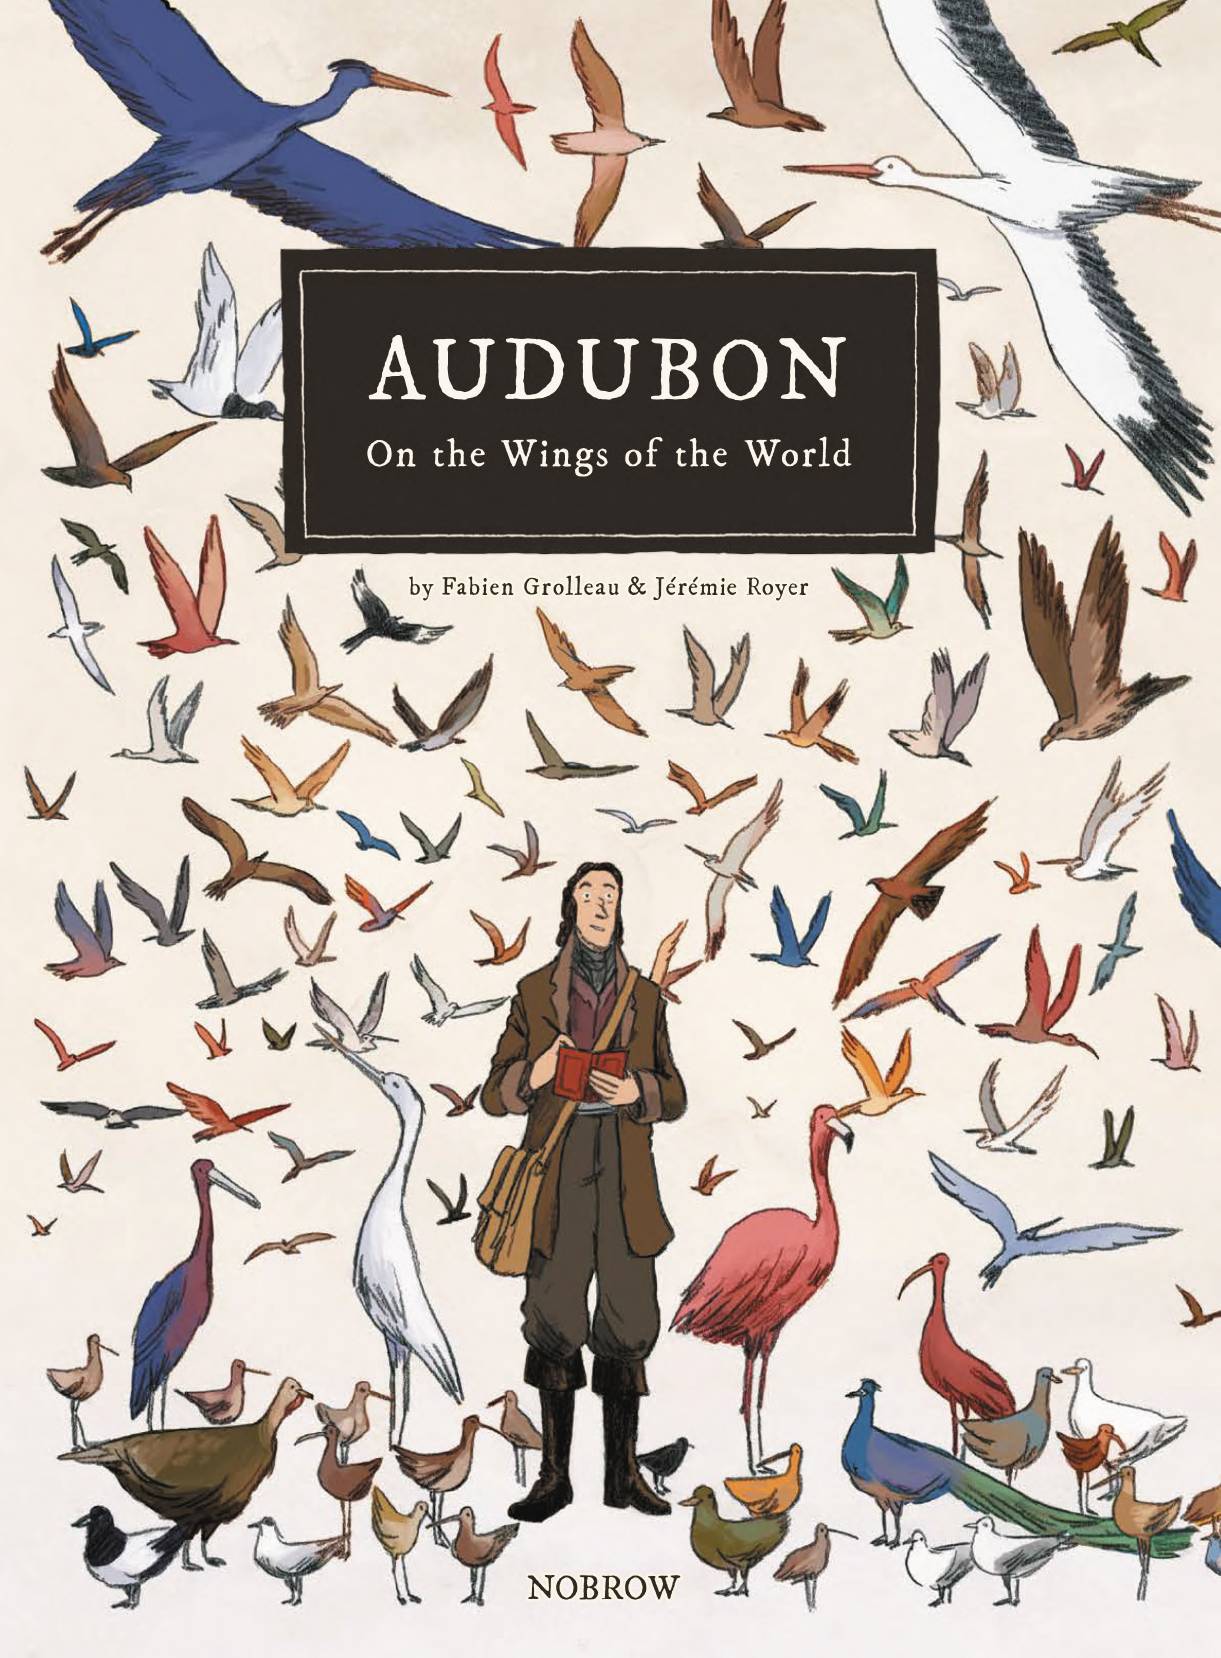 Audubon On the Wings of the World Graphic Novel